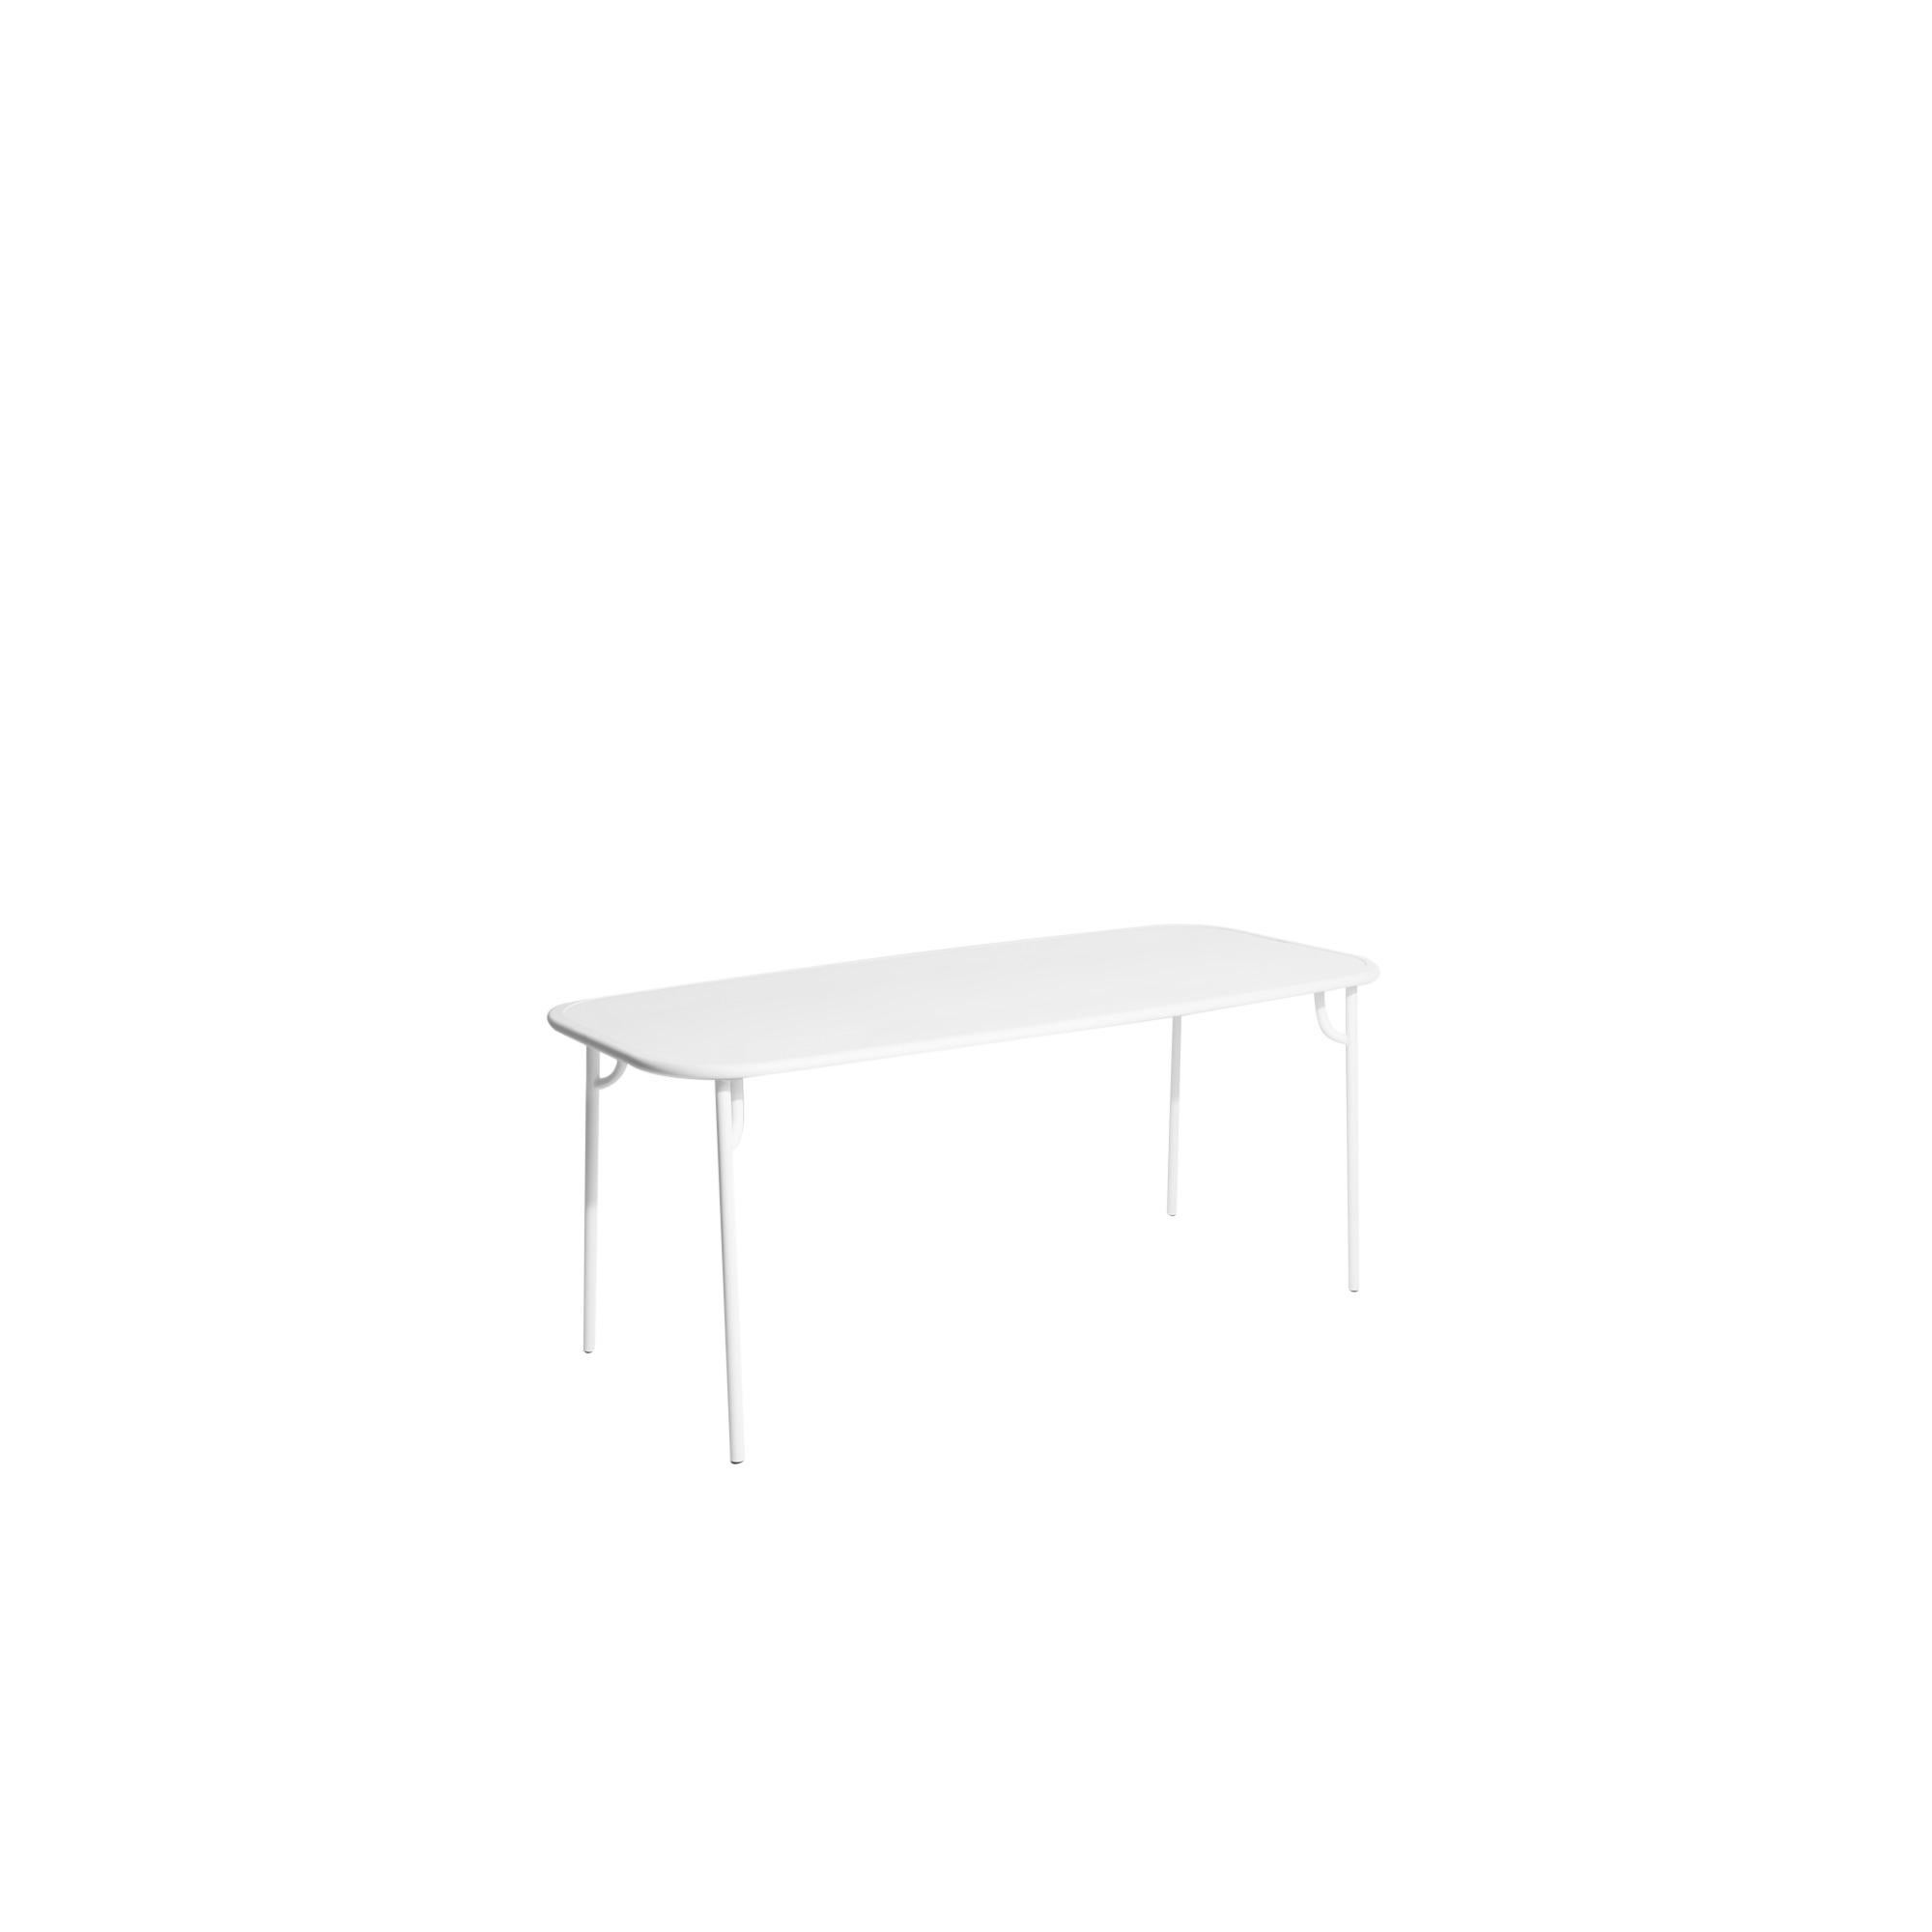 Petite Friture Week-End Medium Plain Rectangular Dining Table in White Aluminium by Studio BrichetZiegler, 2017

The week-end collection is a full range of outdoor furniture, in aluminium grained epoxy paint, matt finish, that includes 18